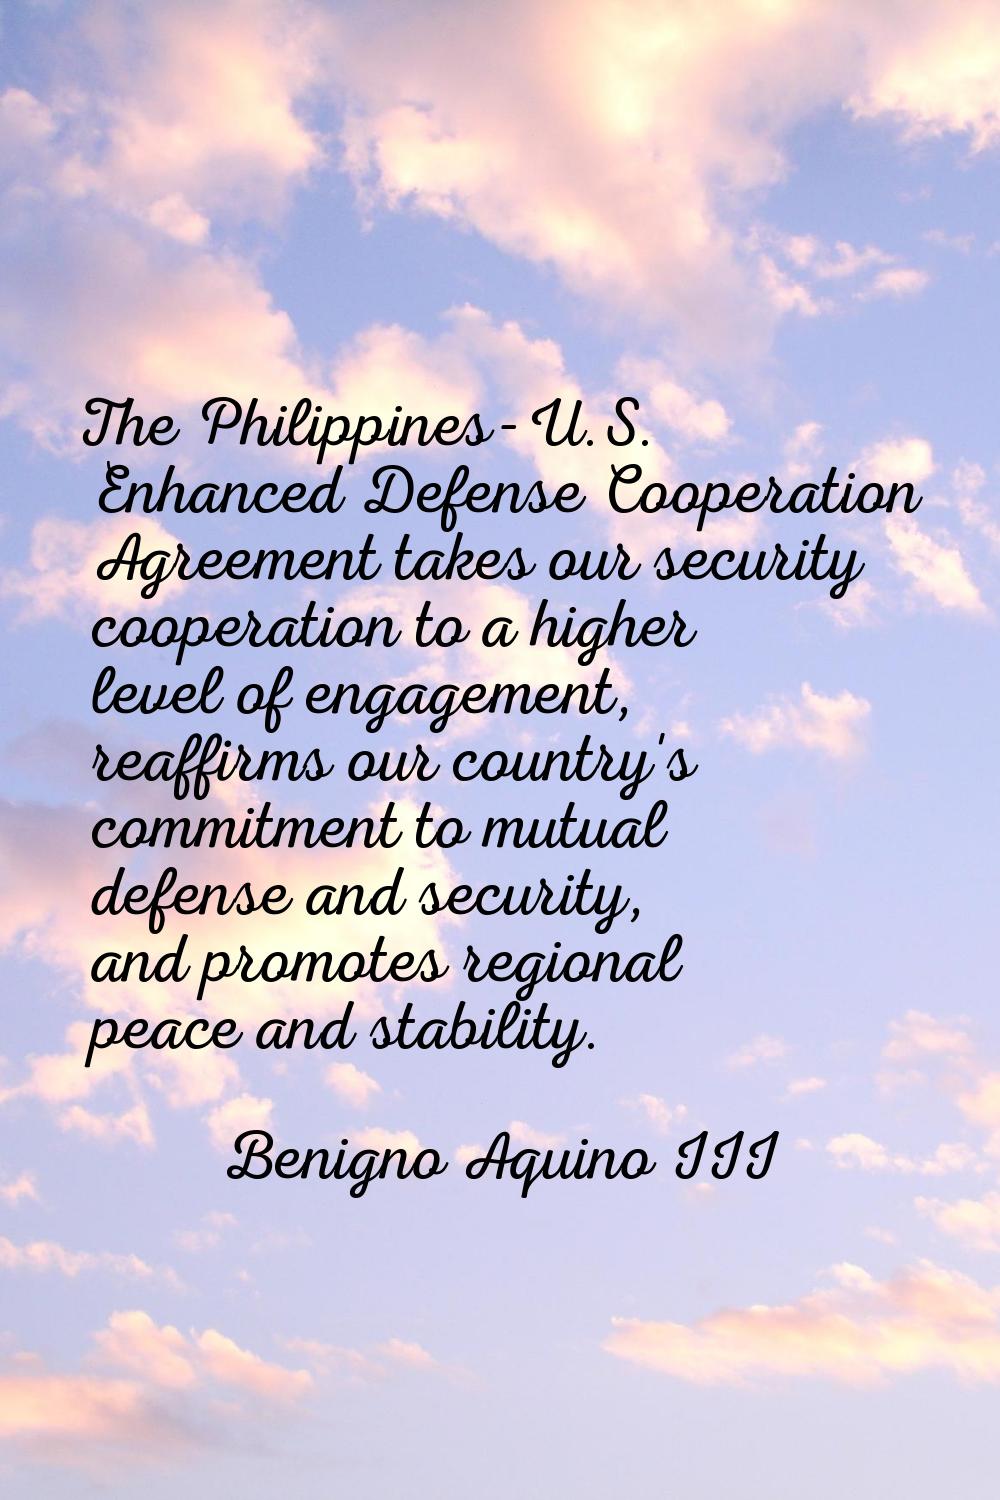 The Philippines-U.S. Enhanced Defense Cooperation Agreement takes our security cooperation to a hig